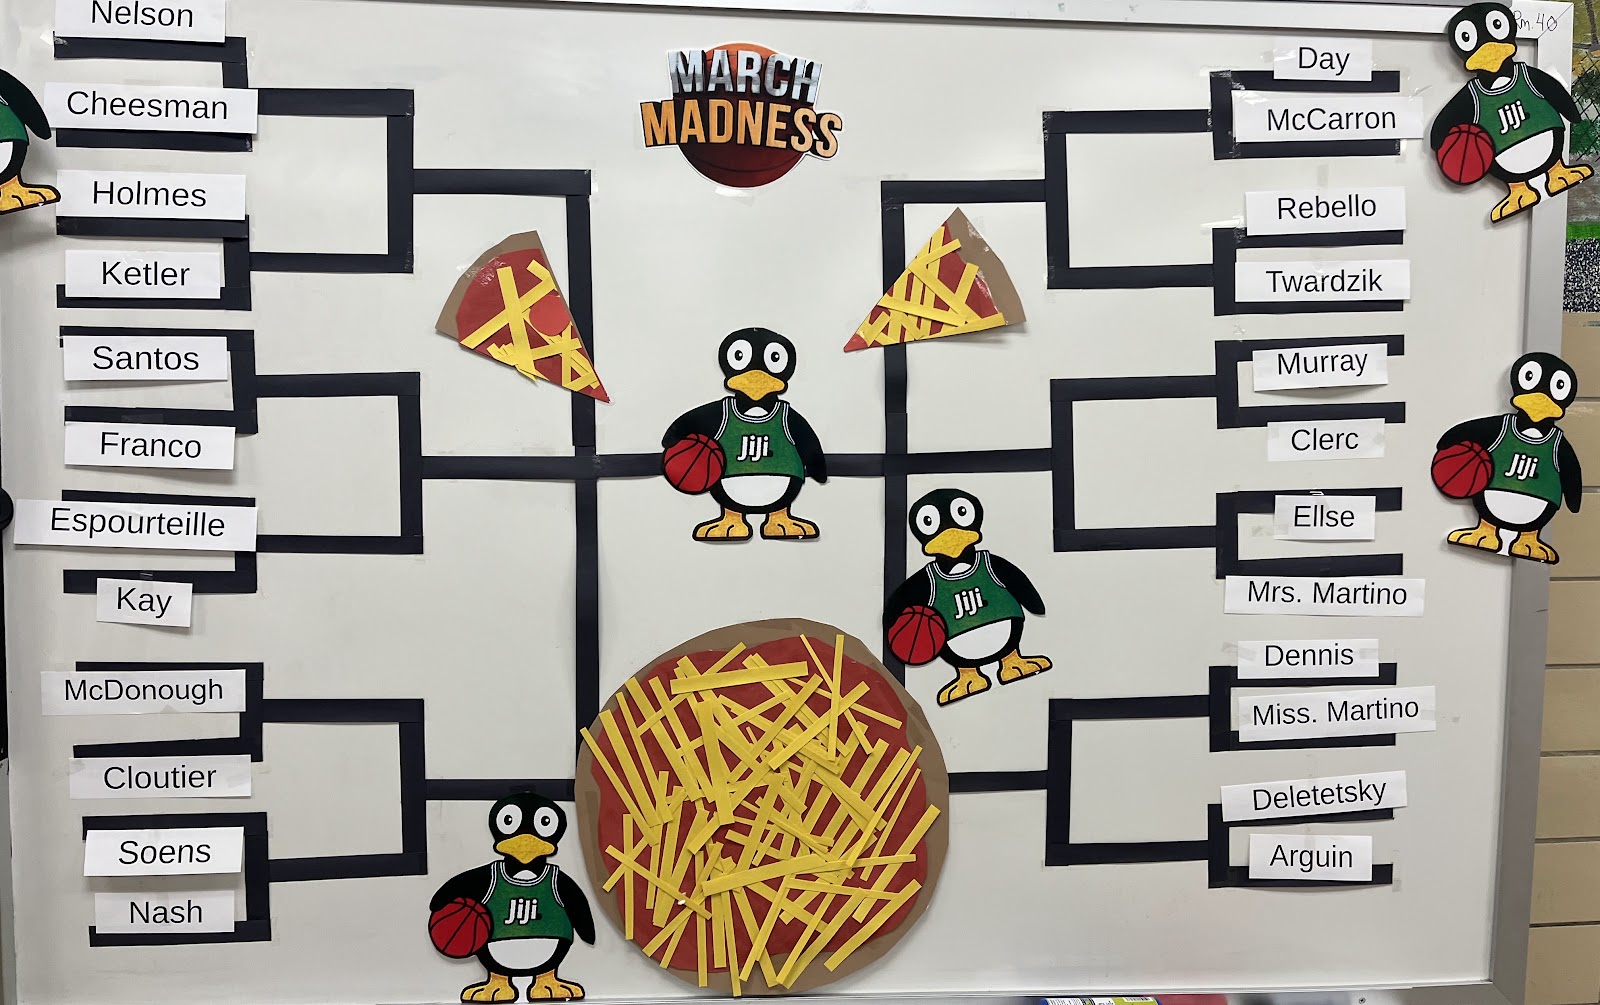 image of the math march madness brackets